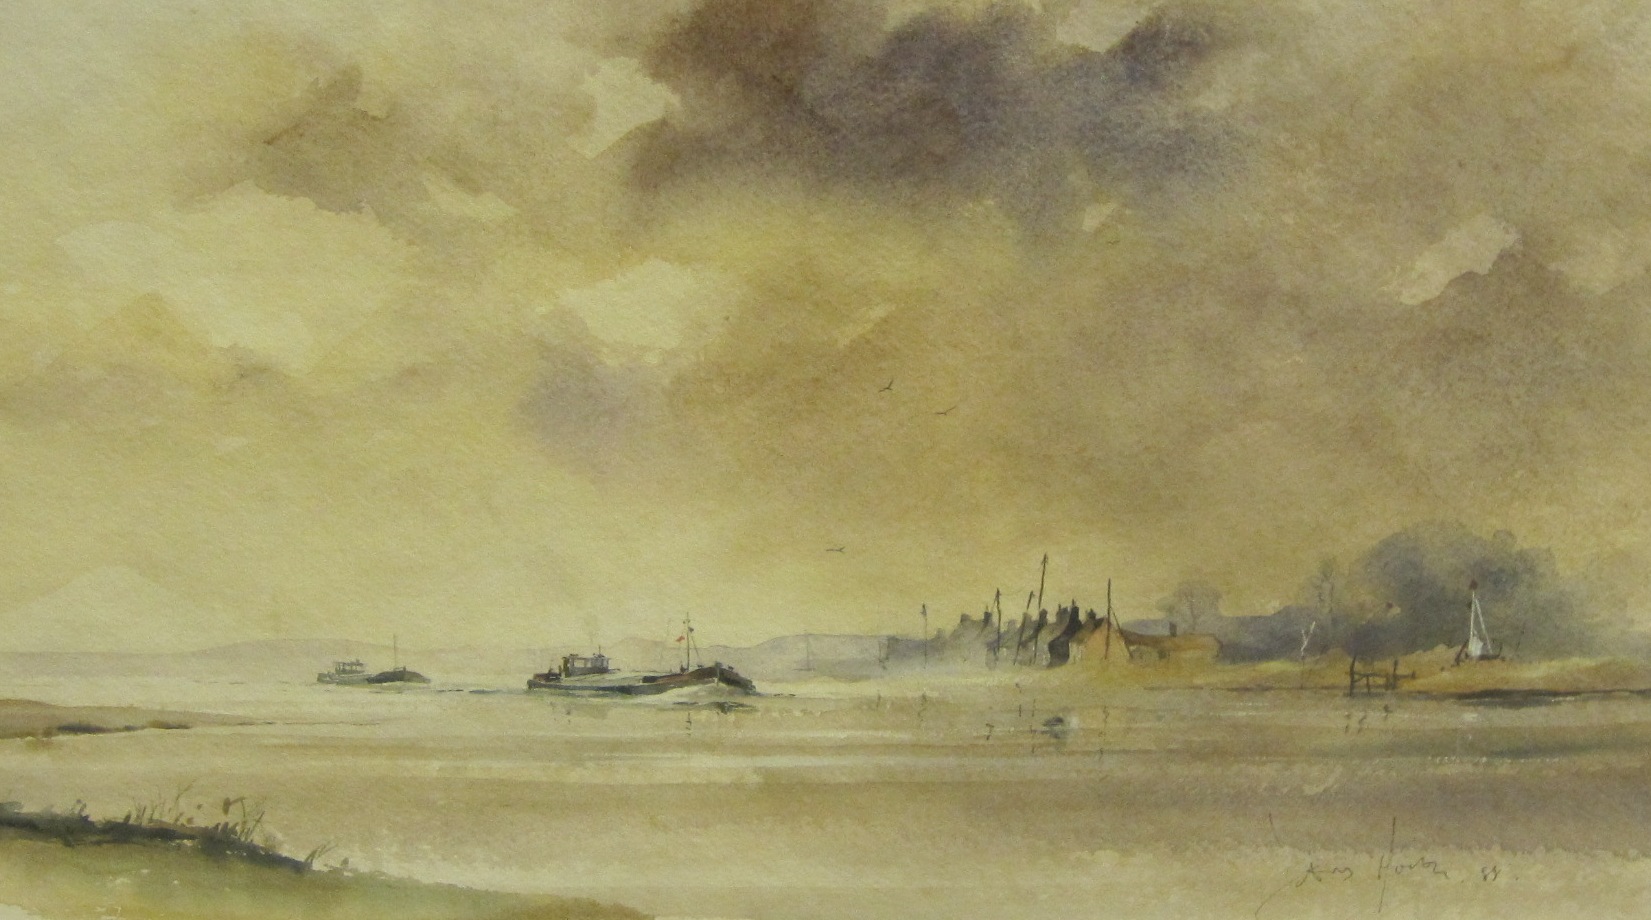 DAVID HOWELL. Barges headed for Goole, signed and dated 88, watercolour, 10 1/2 x 18 in